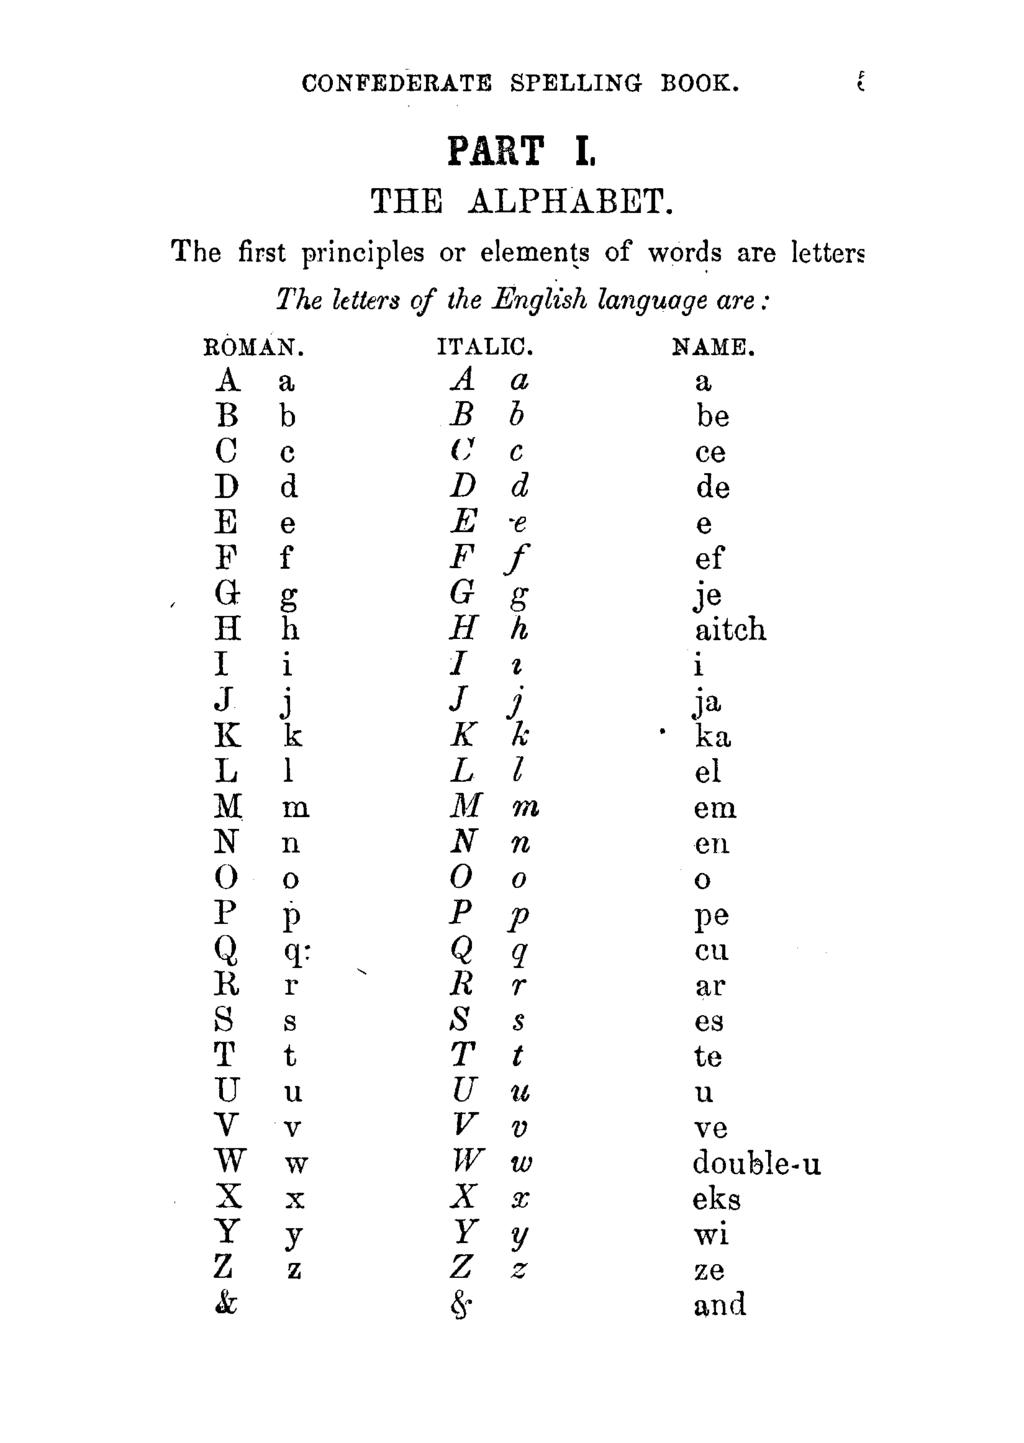 PART I. CONFEDERATE SPELLING BOOK. THE ALPHABET. The first principles or elements of words are letters ROMAN.